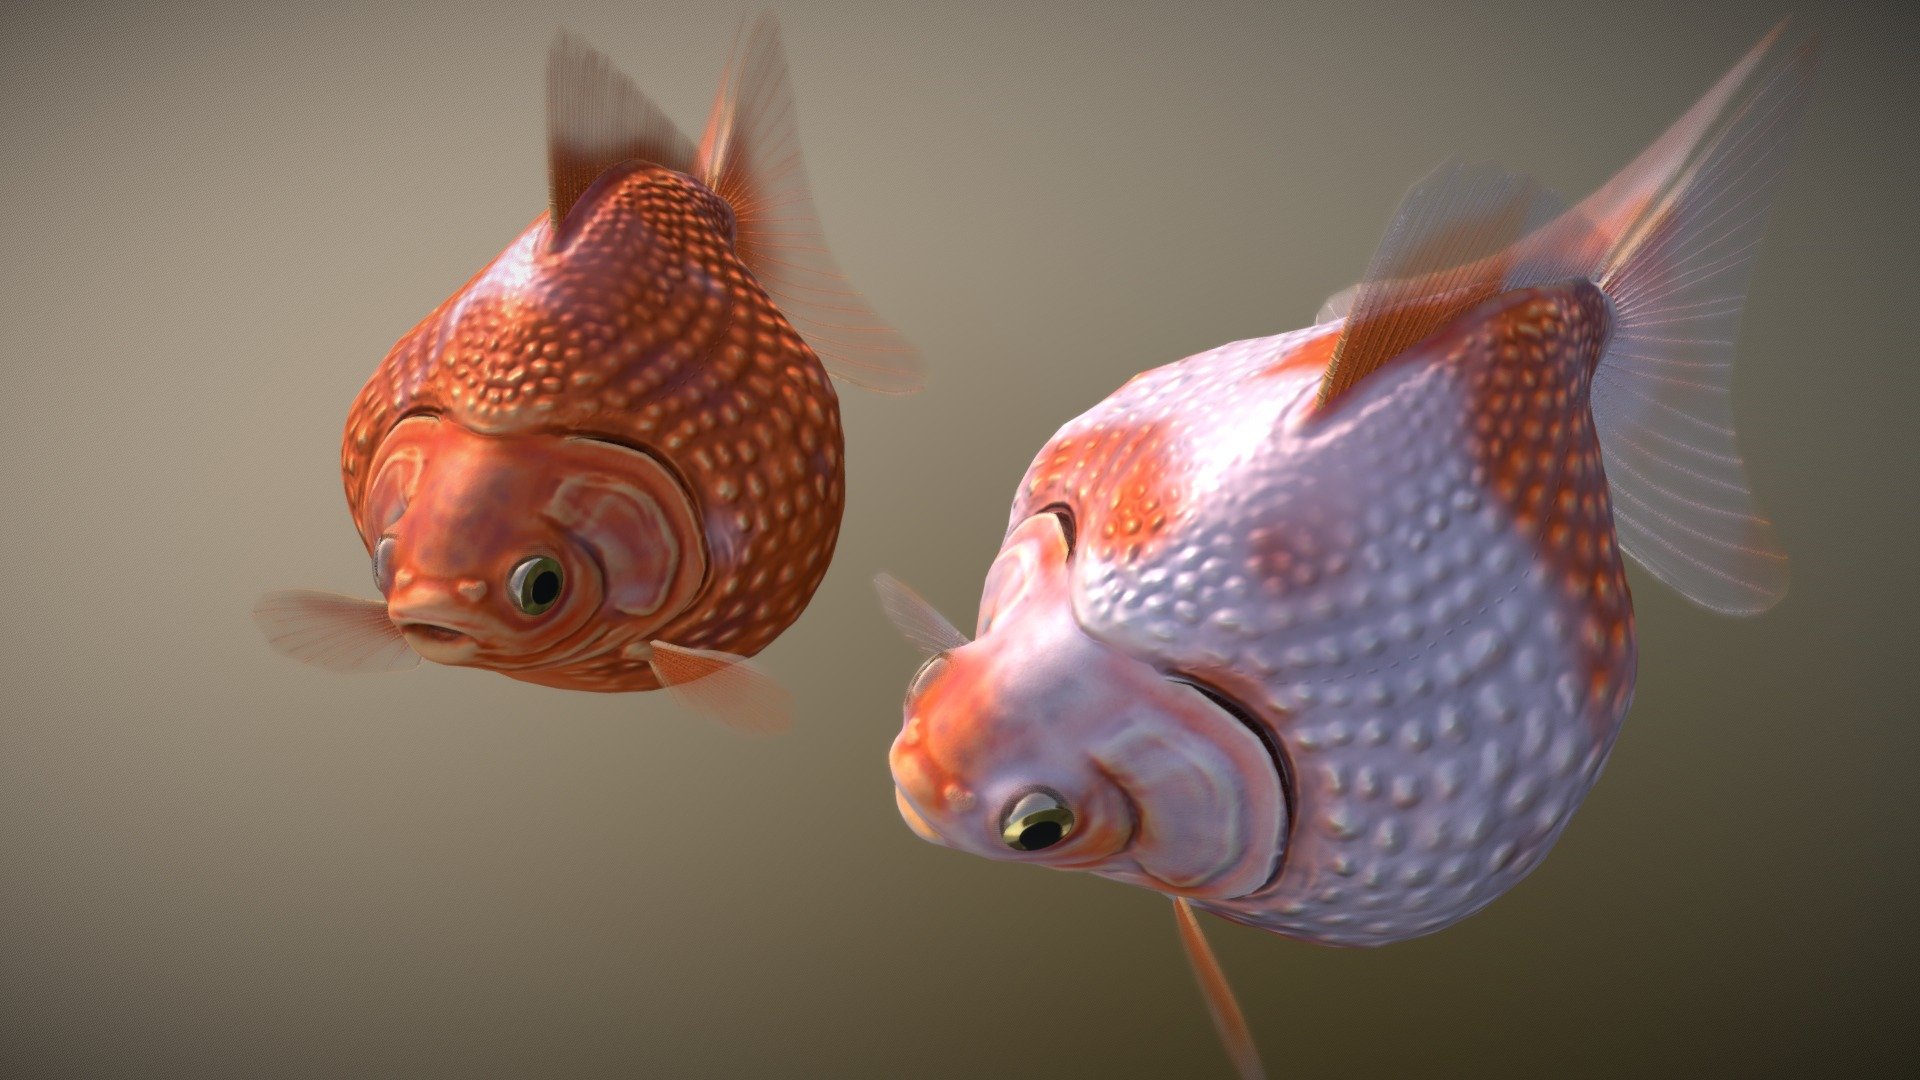 Fully Textured and rigged Pearlscale goldfish model.

This breed of goldfish is known for its protrusion of their scales forming a pearl like shape and coloring.  They come in all shapes and forms but the models here are of the Pingpong Pearl goldfish from Southeast Asia.  They are the most popular amongst the pearlscales for their unusually round shape, kinda like a puffer fish.

I usually try to pick a dynamic pose as a thumbnail for SF.  But with their extreme chubbiness, no matter how hard I tried, they weren't achieving any dynamicness.  So instead I added one more with different color and animation variation.  Now people can get two for the price of one!  (jk, they are free downloads).


Modeling, rigging, animation done in Blender
Texturing done in Substance Painter

All C&amp;C are welcome!  Let me know what you think! - Pearlscale goldfish - Download Free 3D model by somitsu 3d model